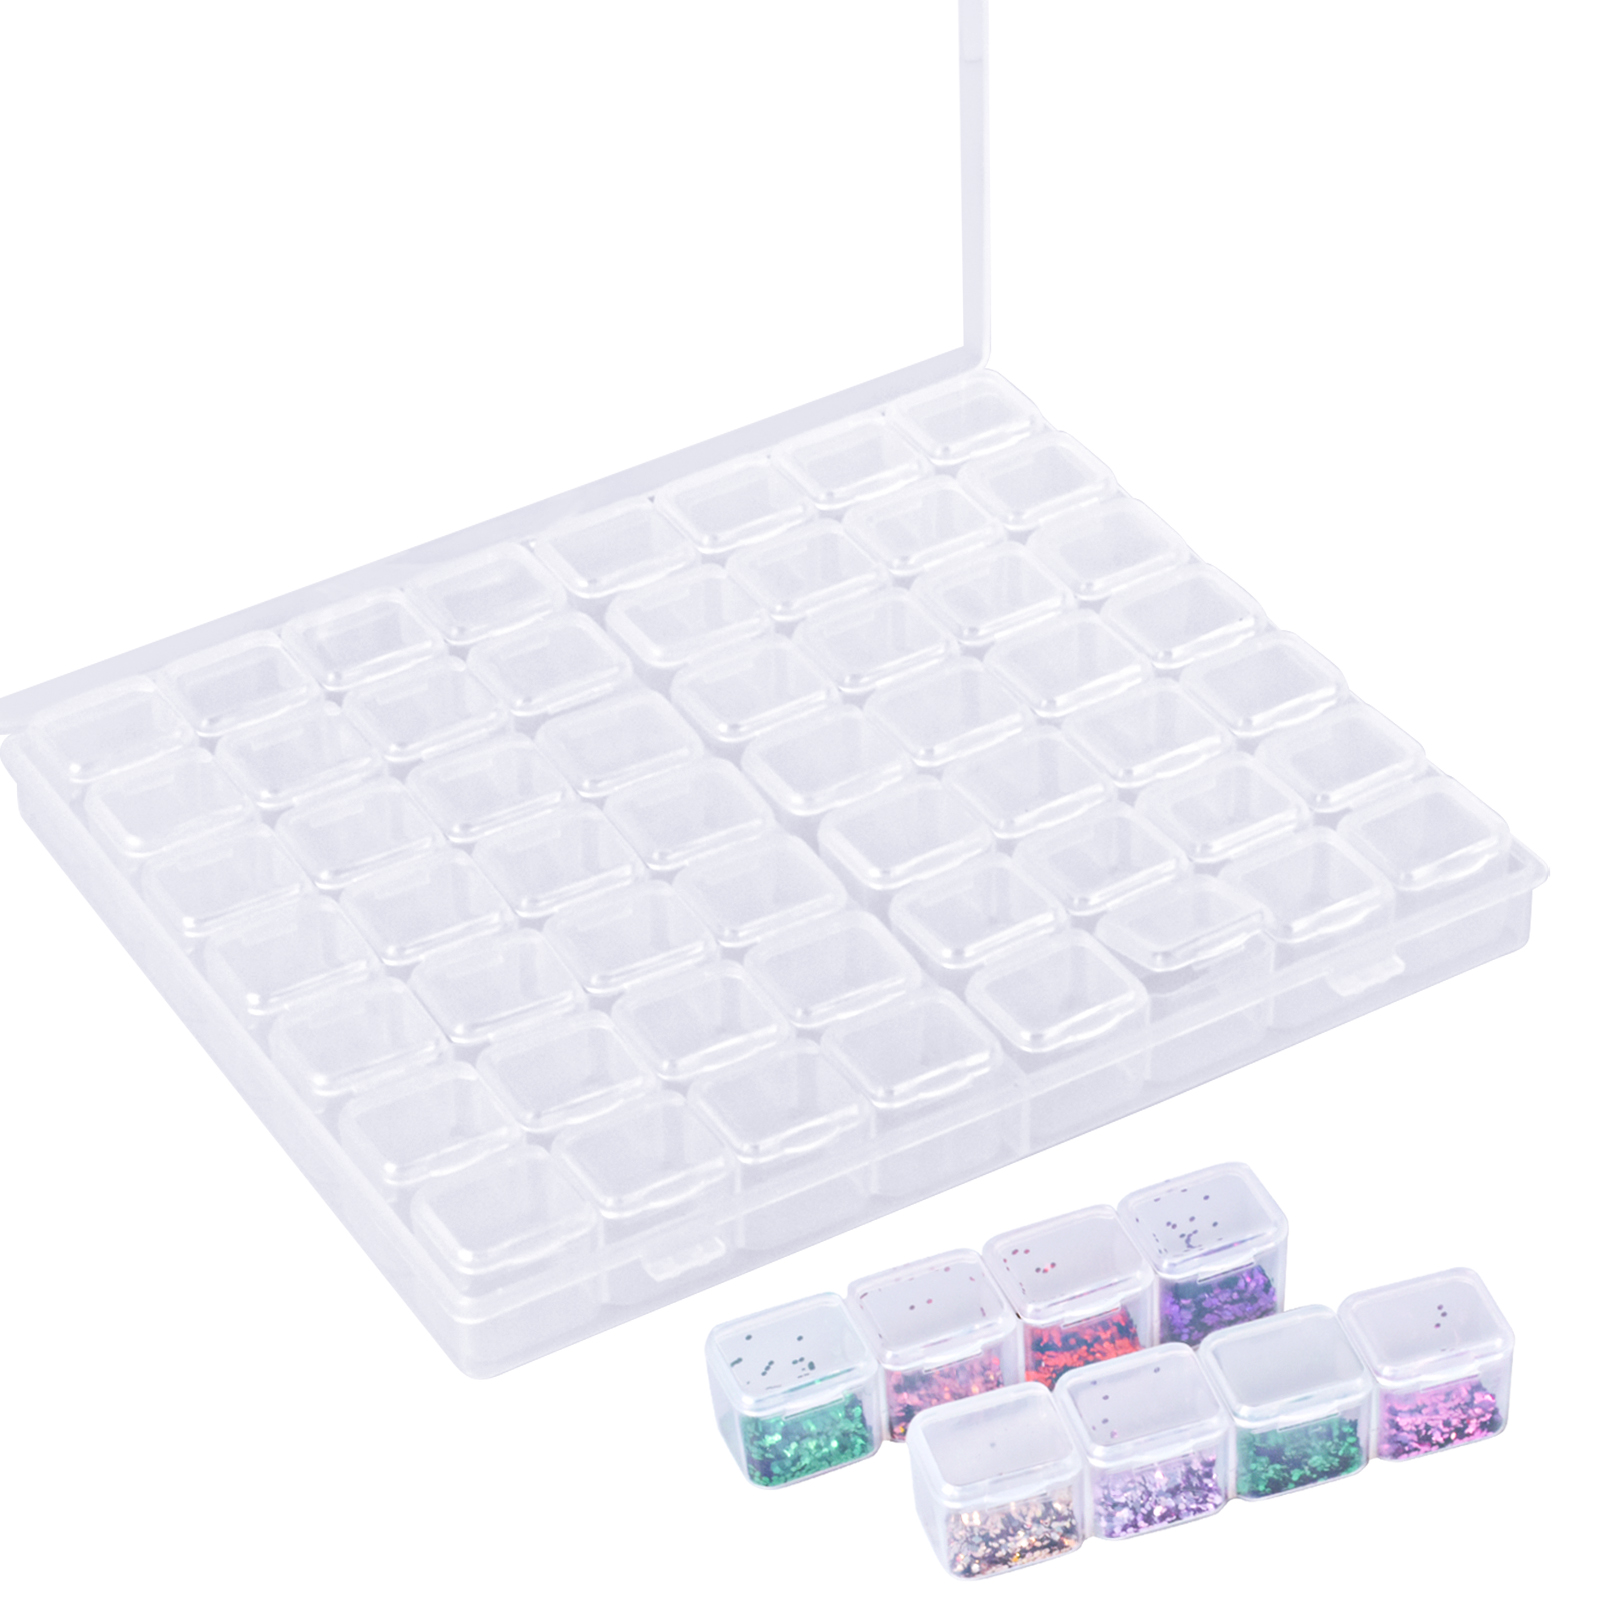 Qianbeiy 12 Grids Plastic Diamond Painting Storage Containers Transparent Bead Organizers and Storage Craft Jewelry Sewing Pills Small Items Seed